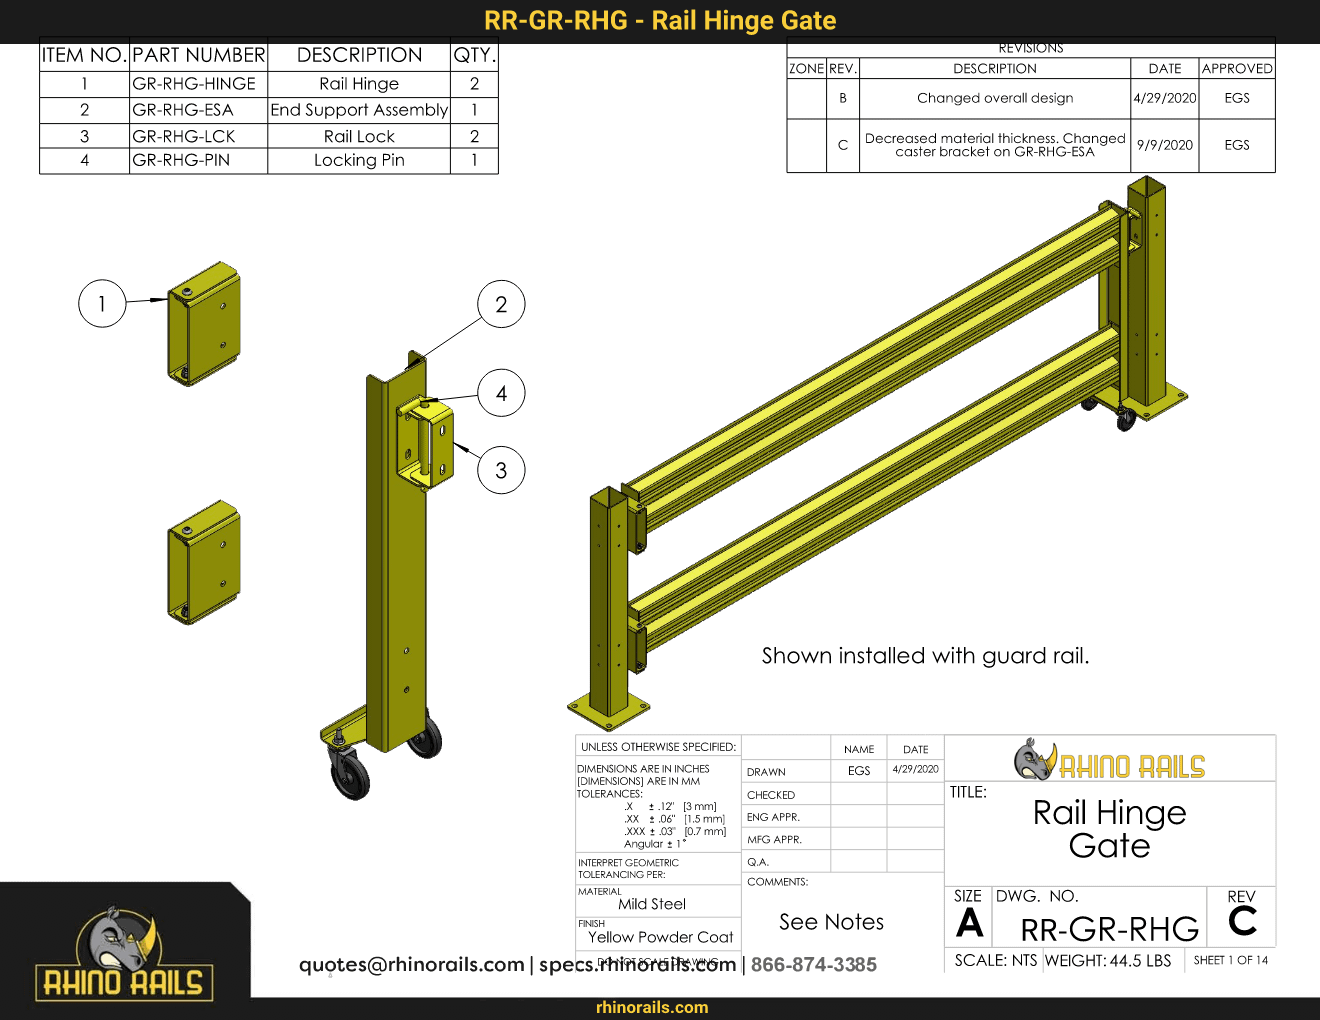 RR-GR-RHG - Product Detail Drawing - Photo